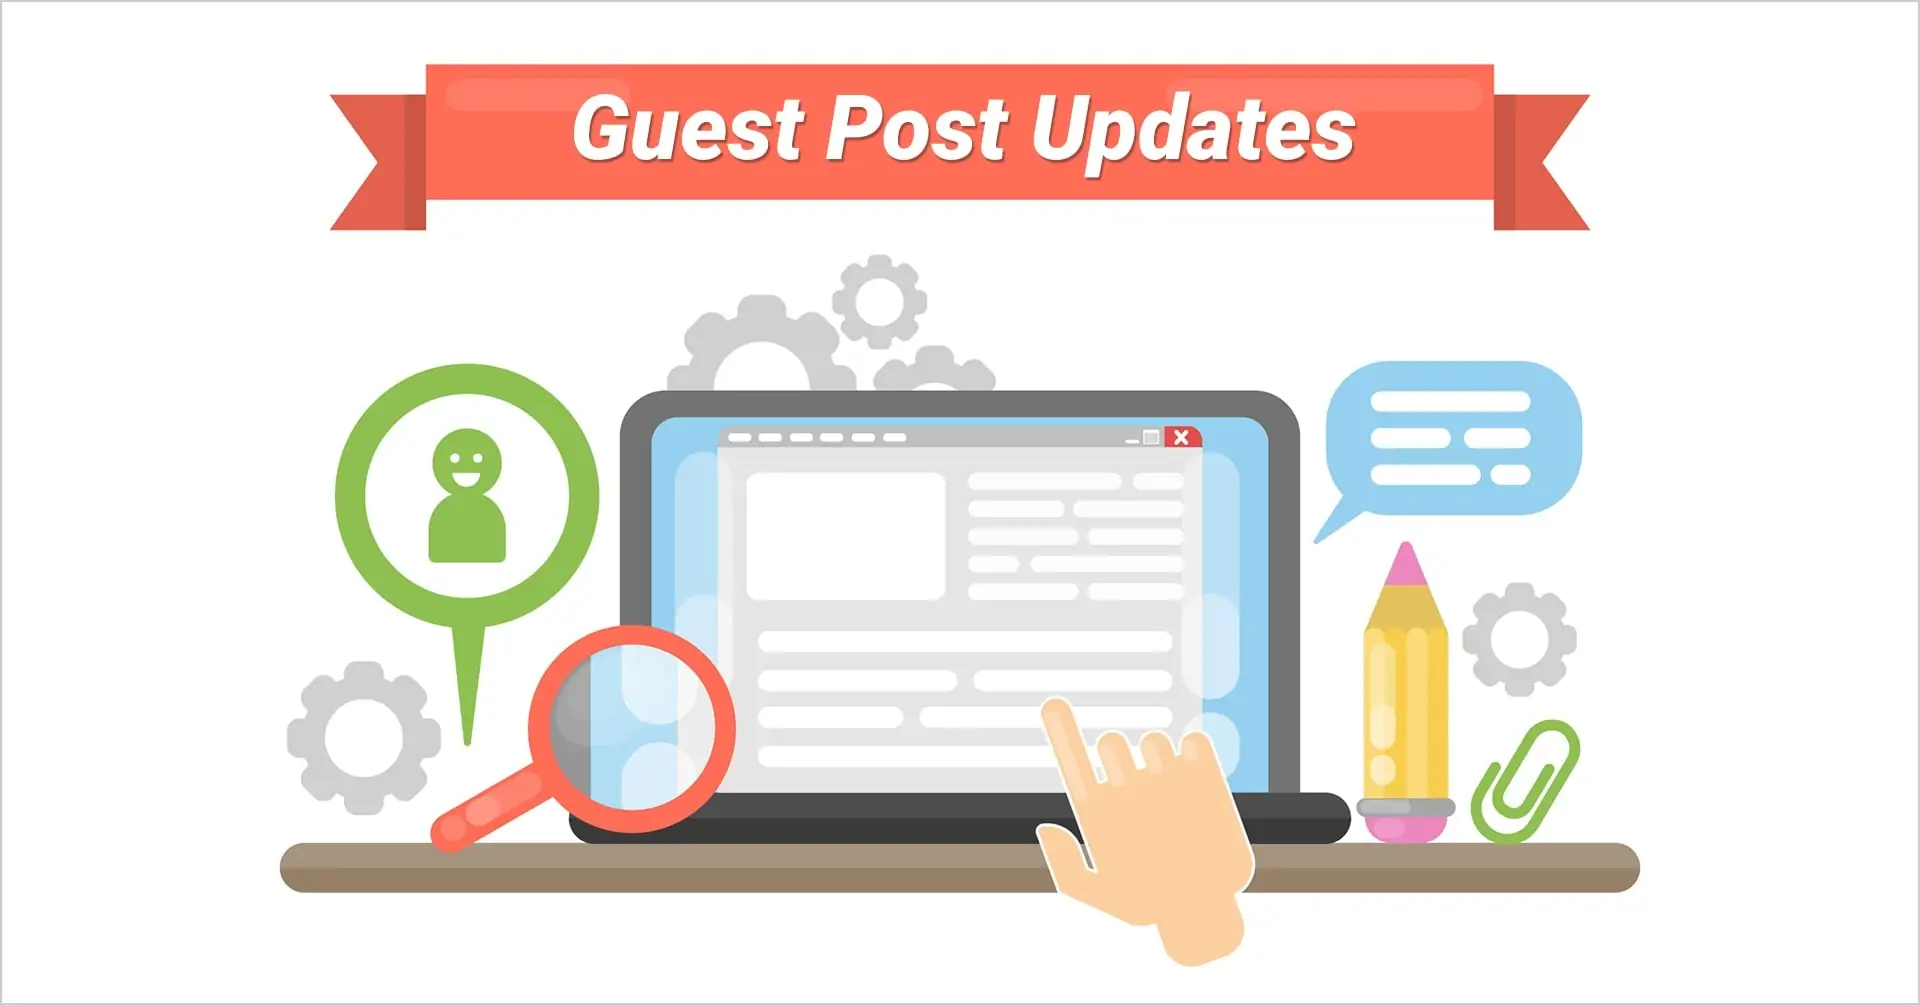 Guest Post Updates, changes to guest post